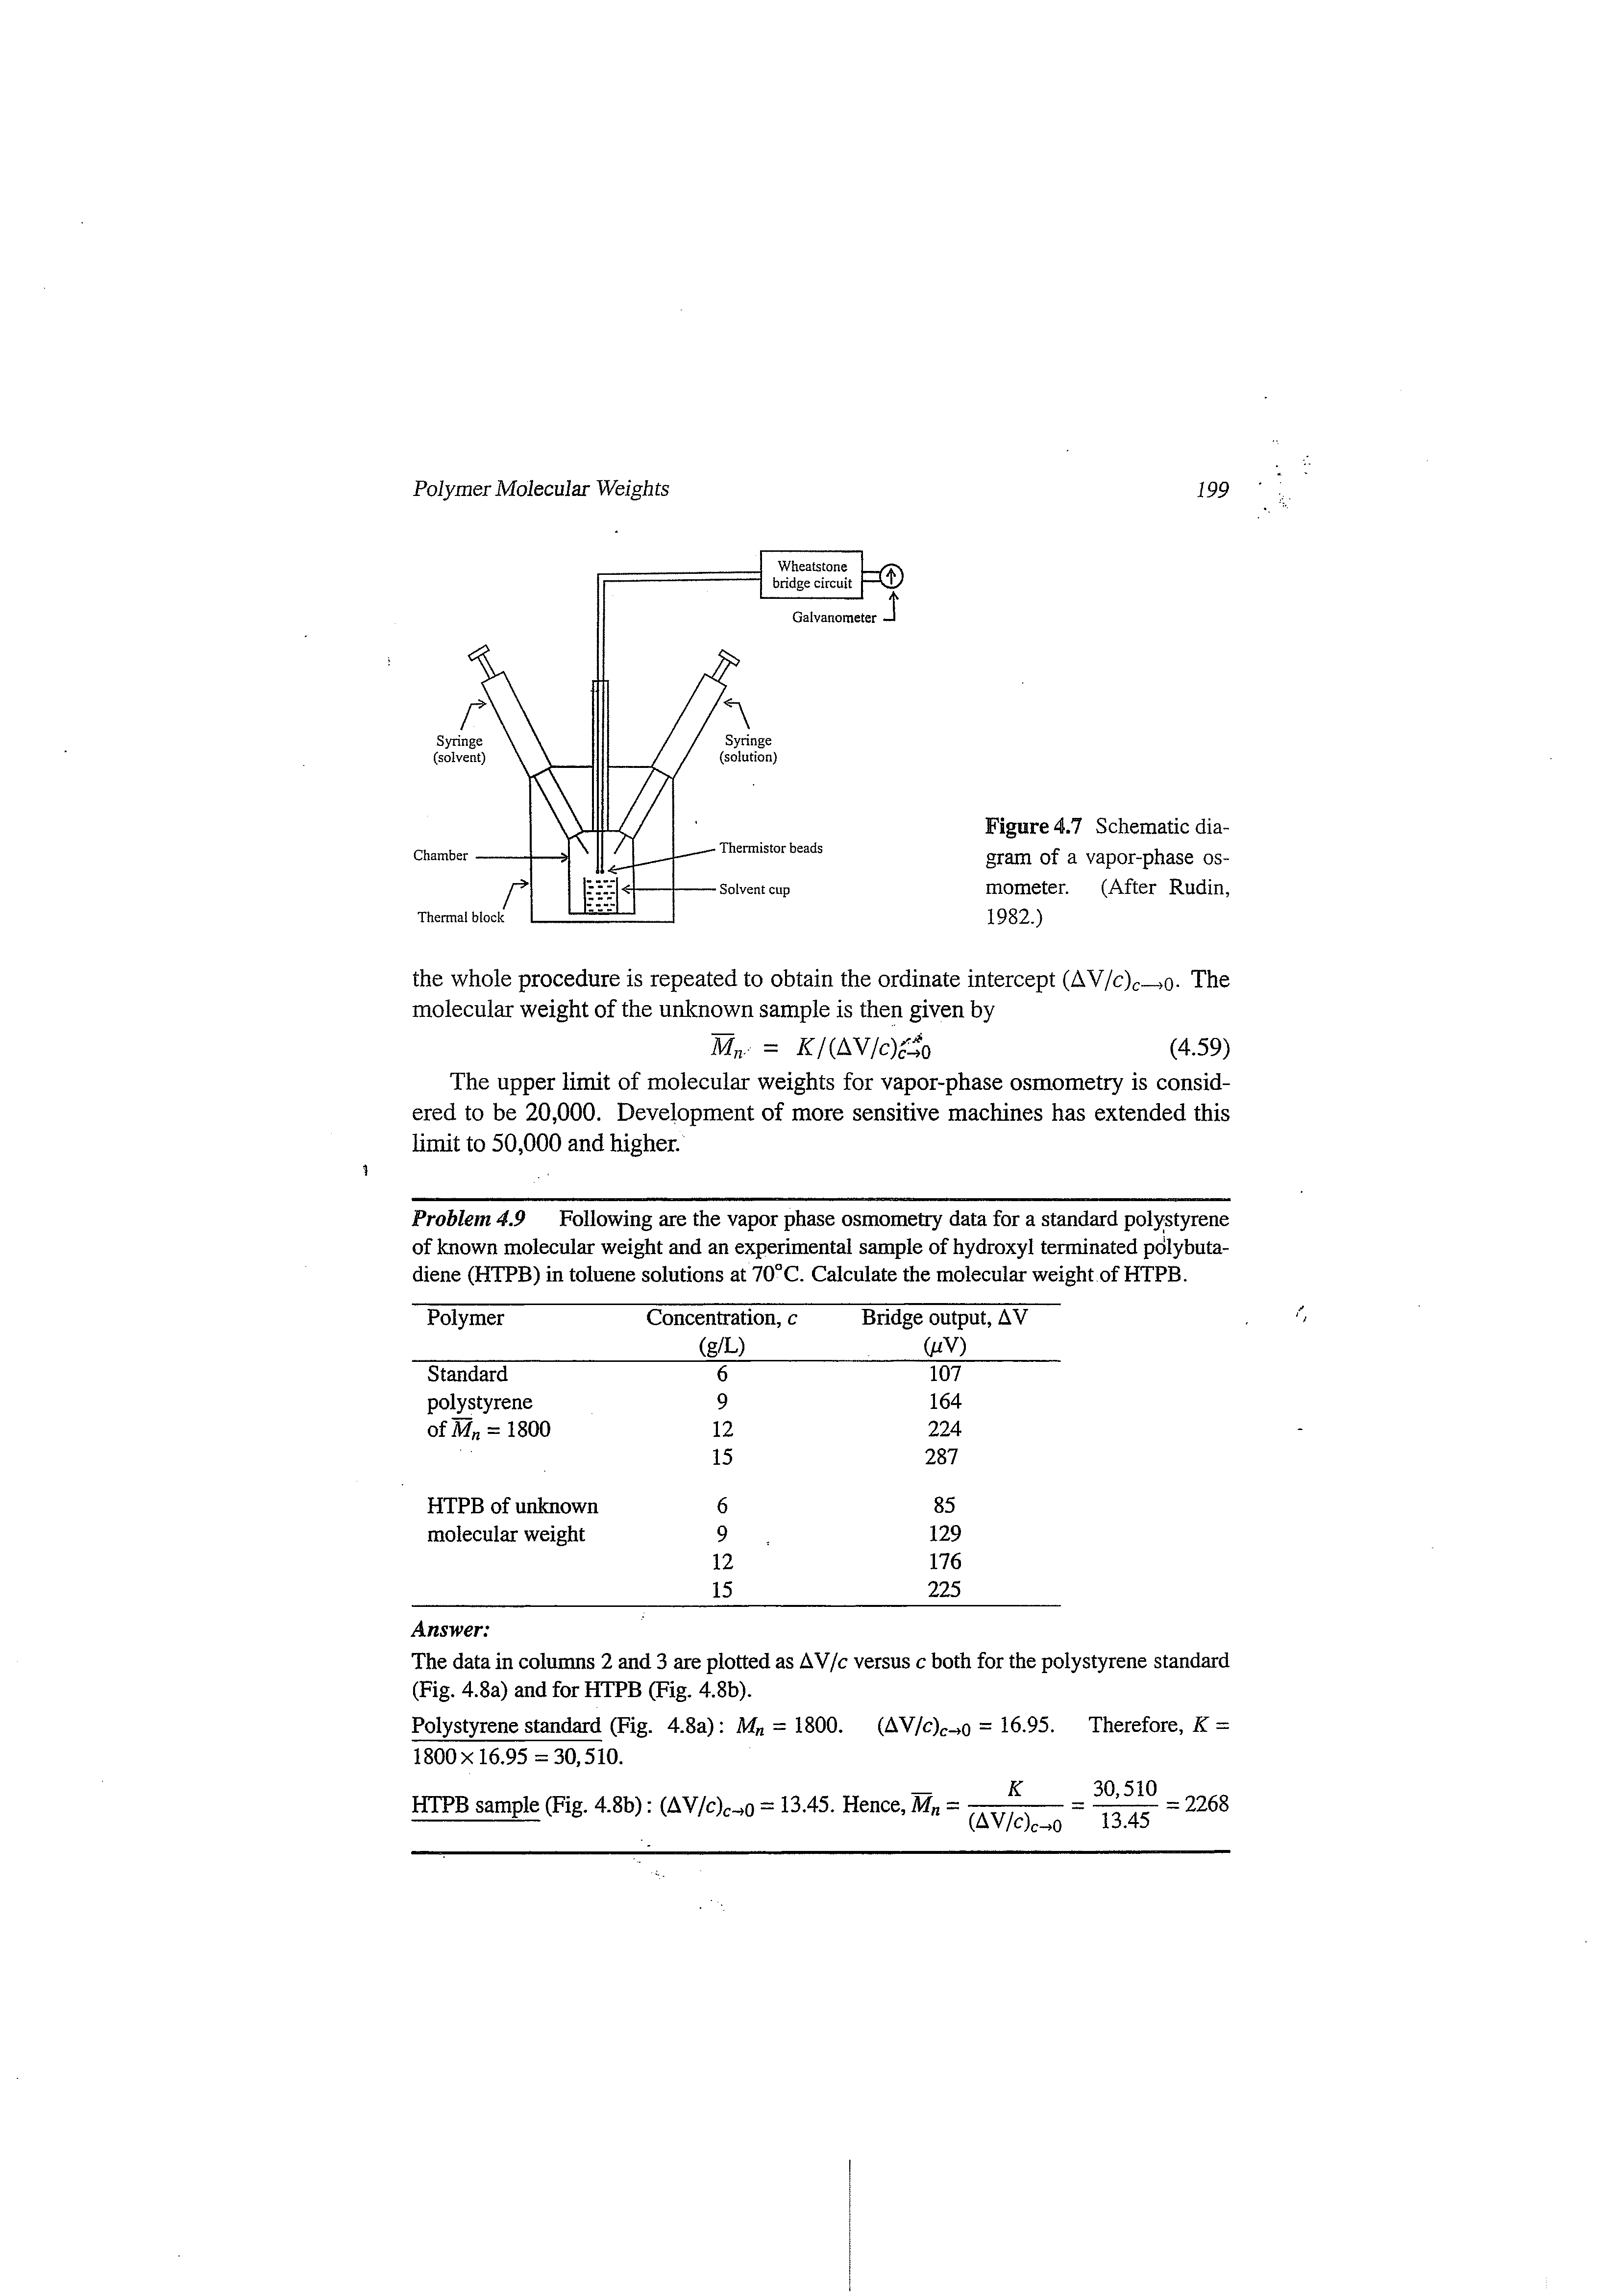 Figure 4.7 Schematic diagram of a vapor-phase osmometer. (After Rudin, 1982.)...